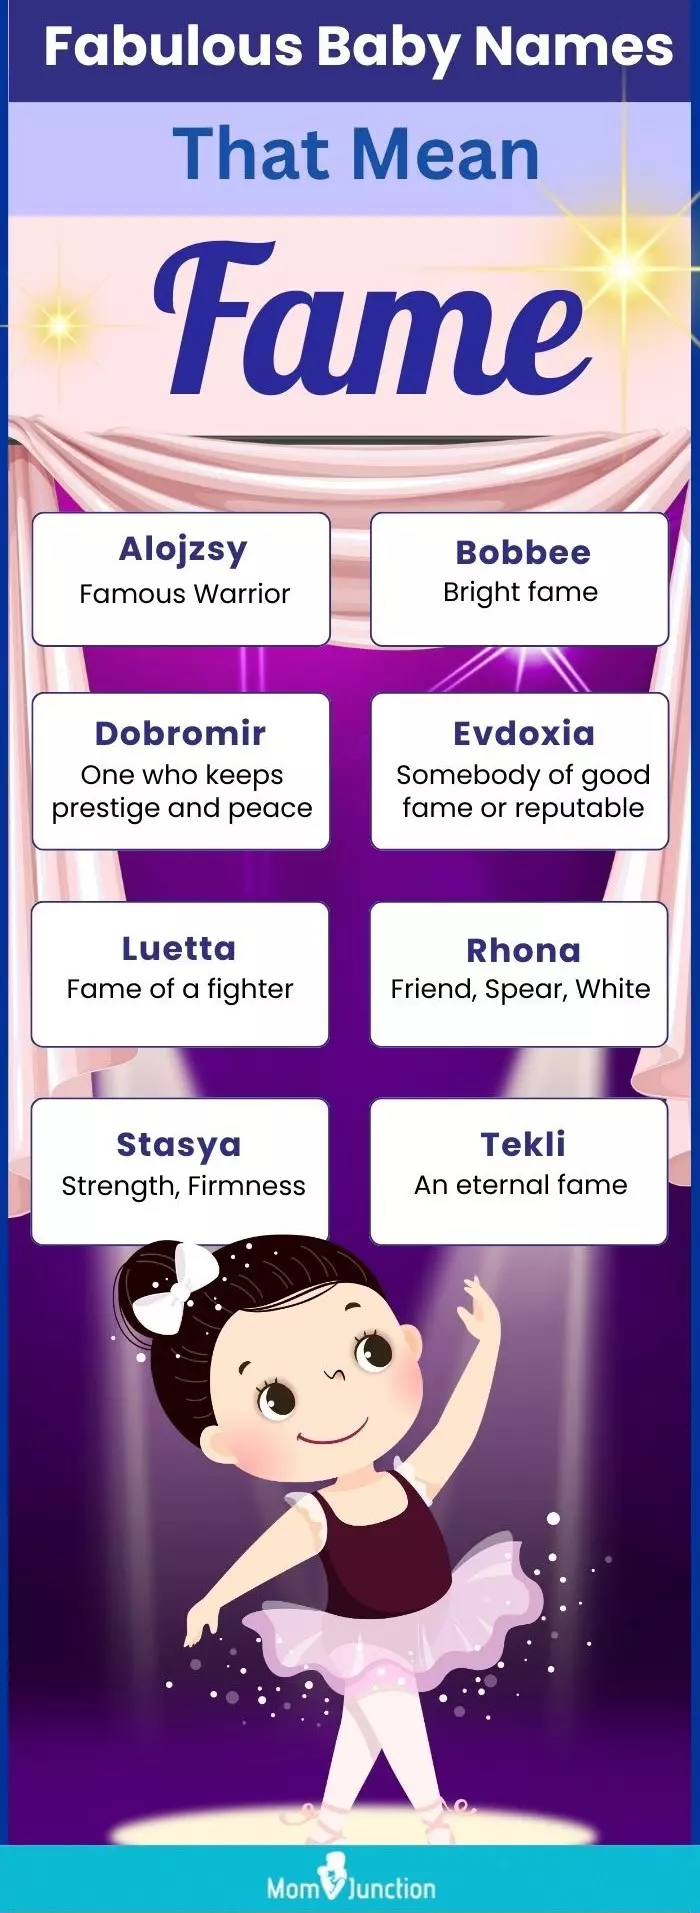 charismatic names that mean fame (infographic)